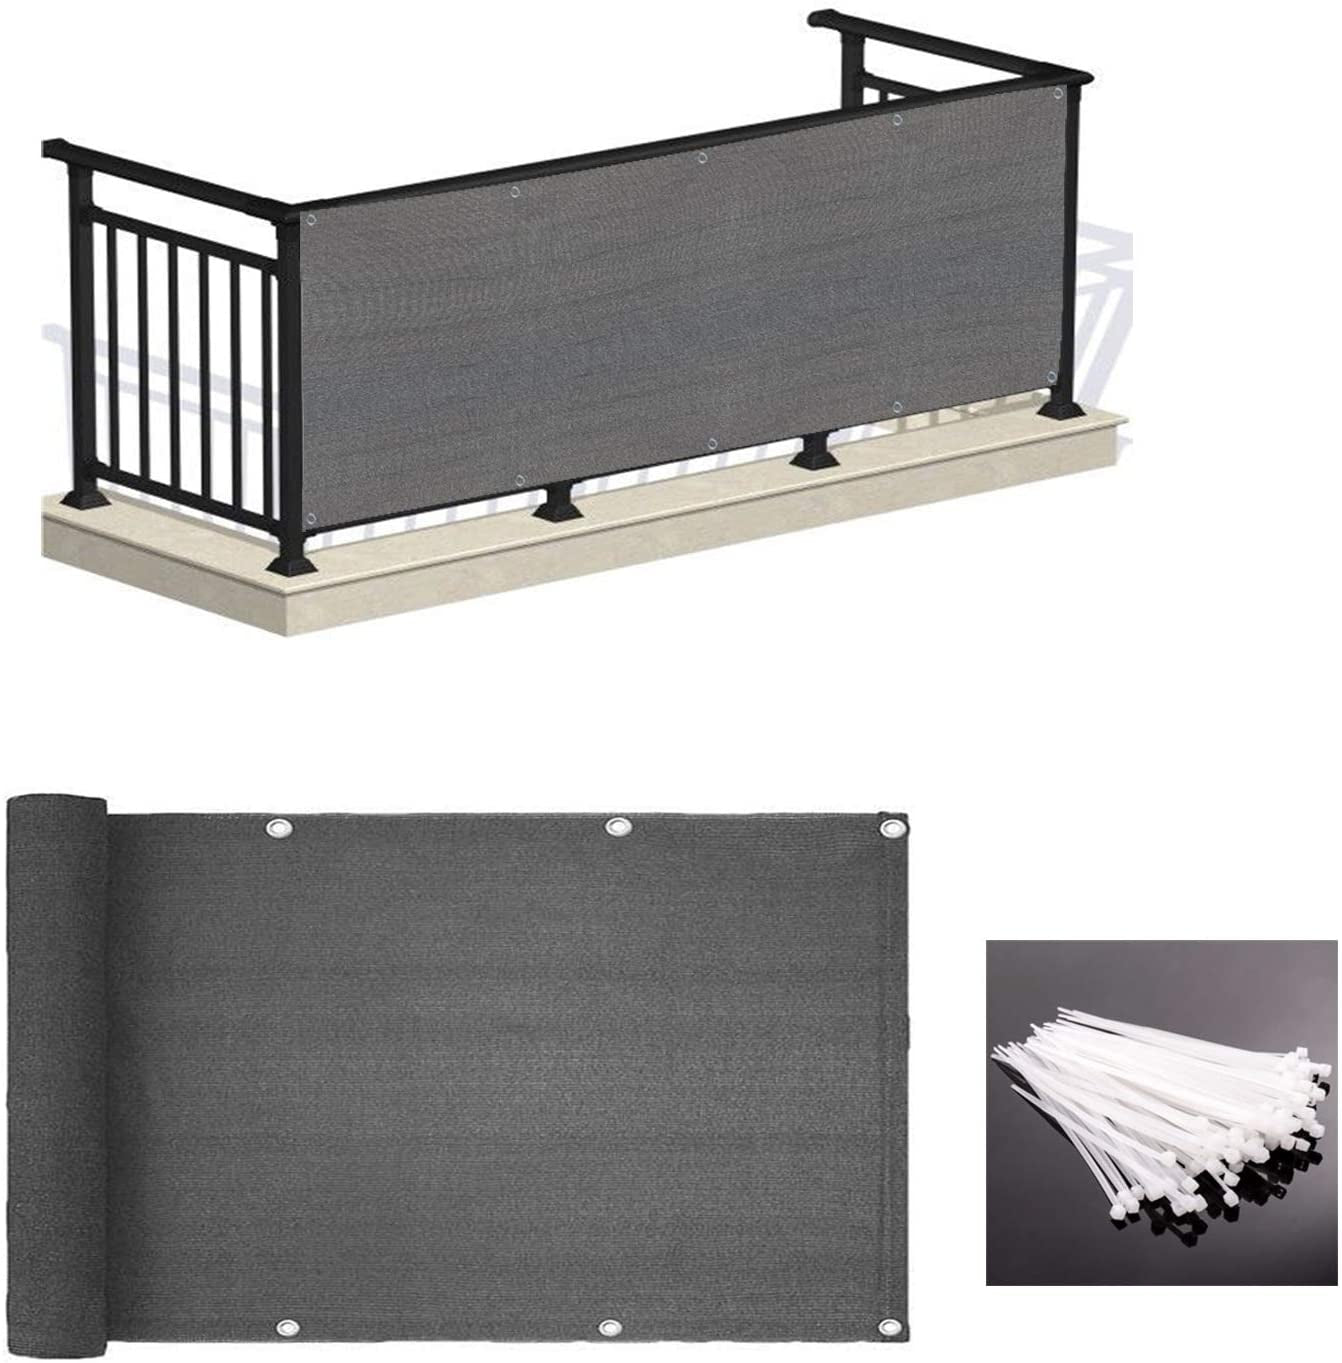 LOVE STORY, LOVE STORY 3'X16' Charcoal Balcony Screen Privacy Fence Waterproof Cover Shade UV Sunblock for Patio, Deck, Patio, Apartment Railings, Shield 90%